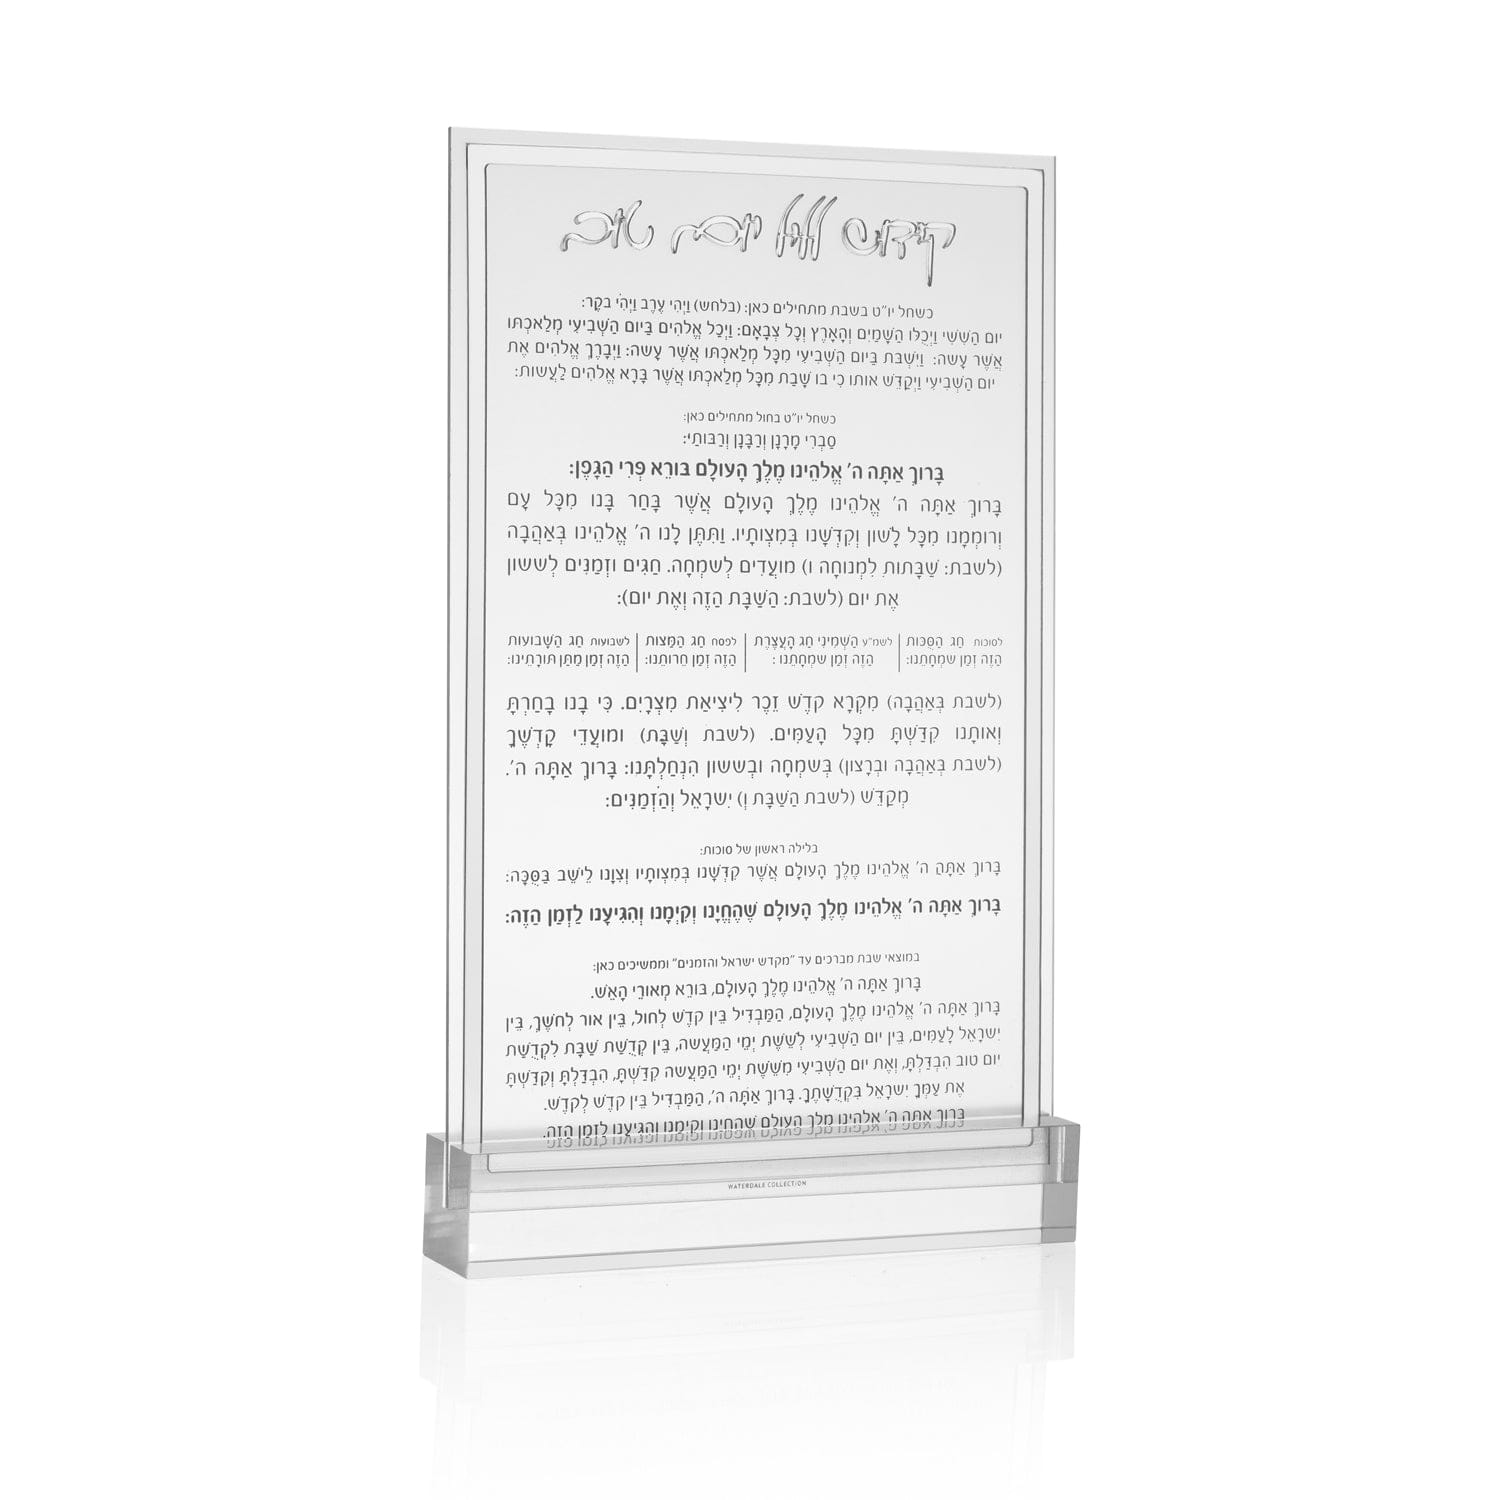 Corporate Gifting - Lucite Card + Base - Waterdale Collection